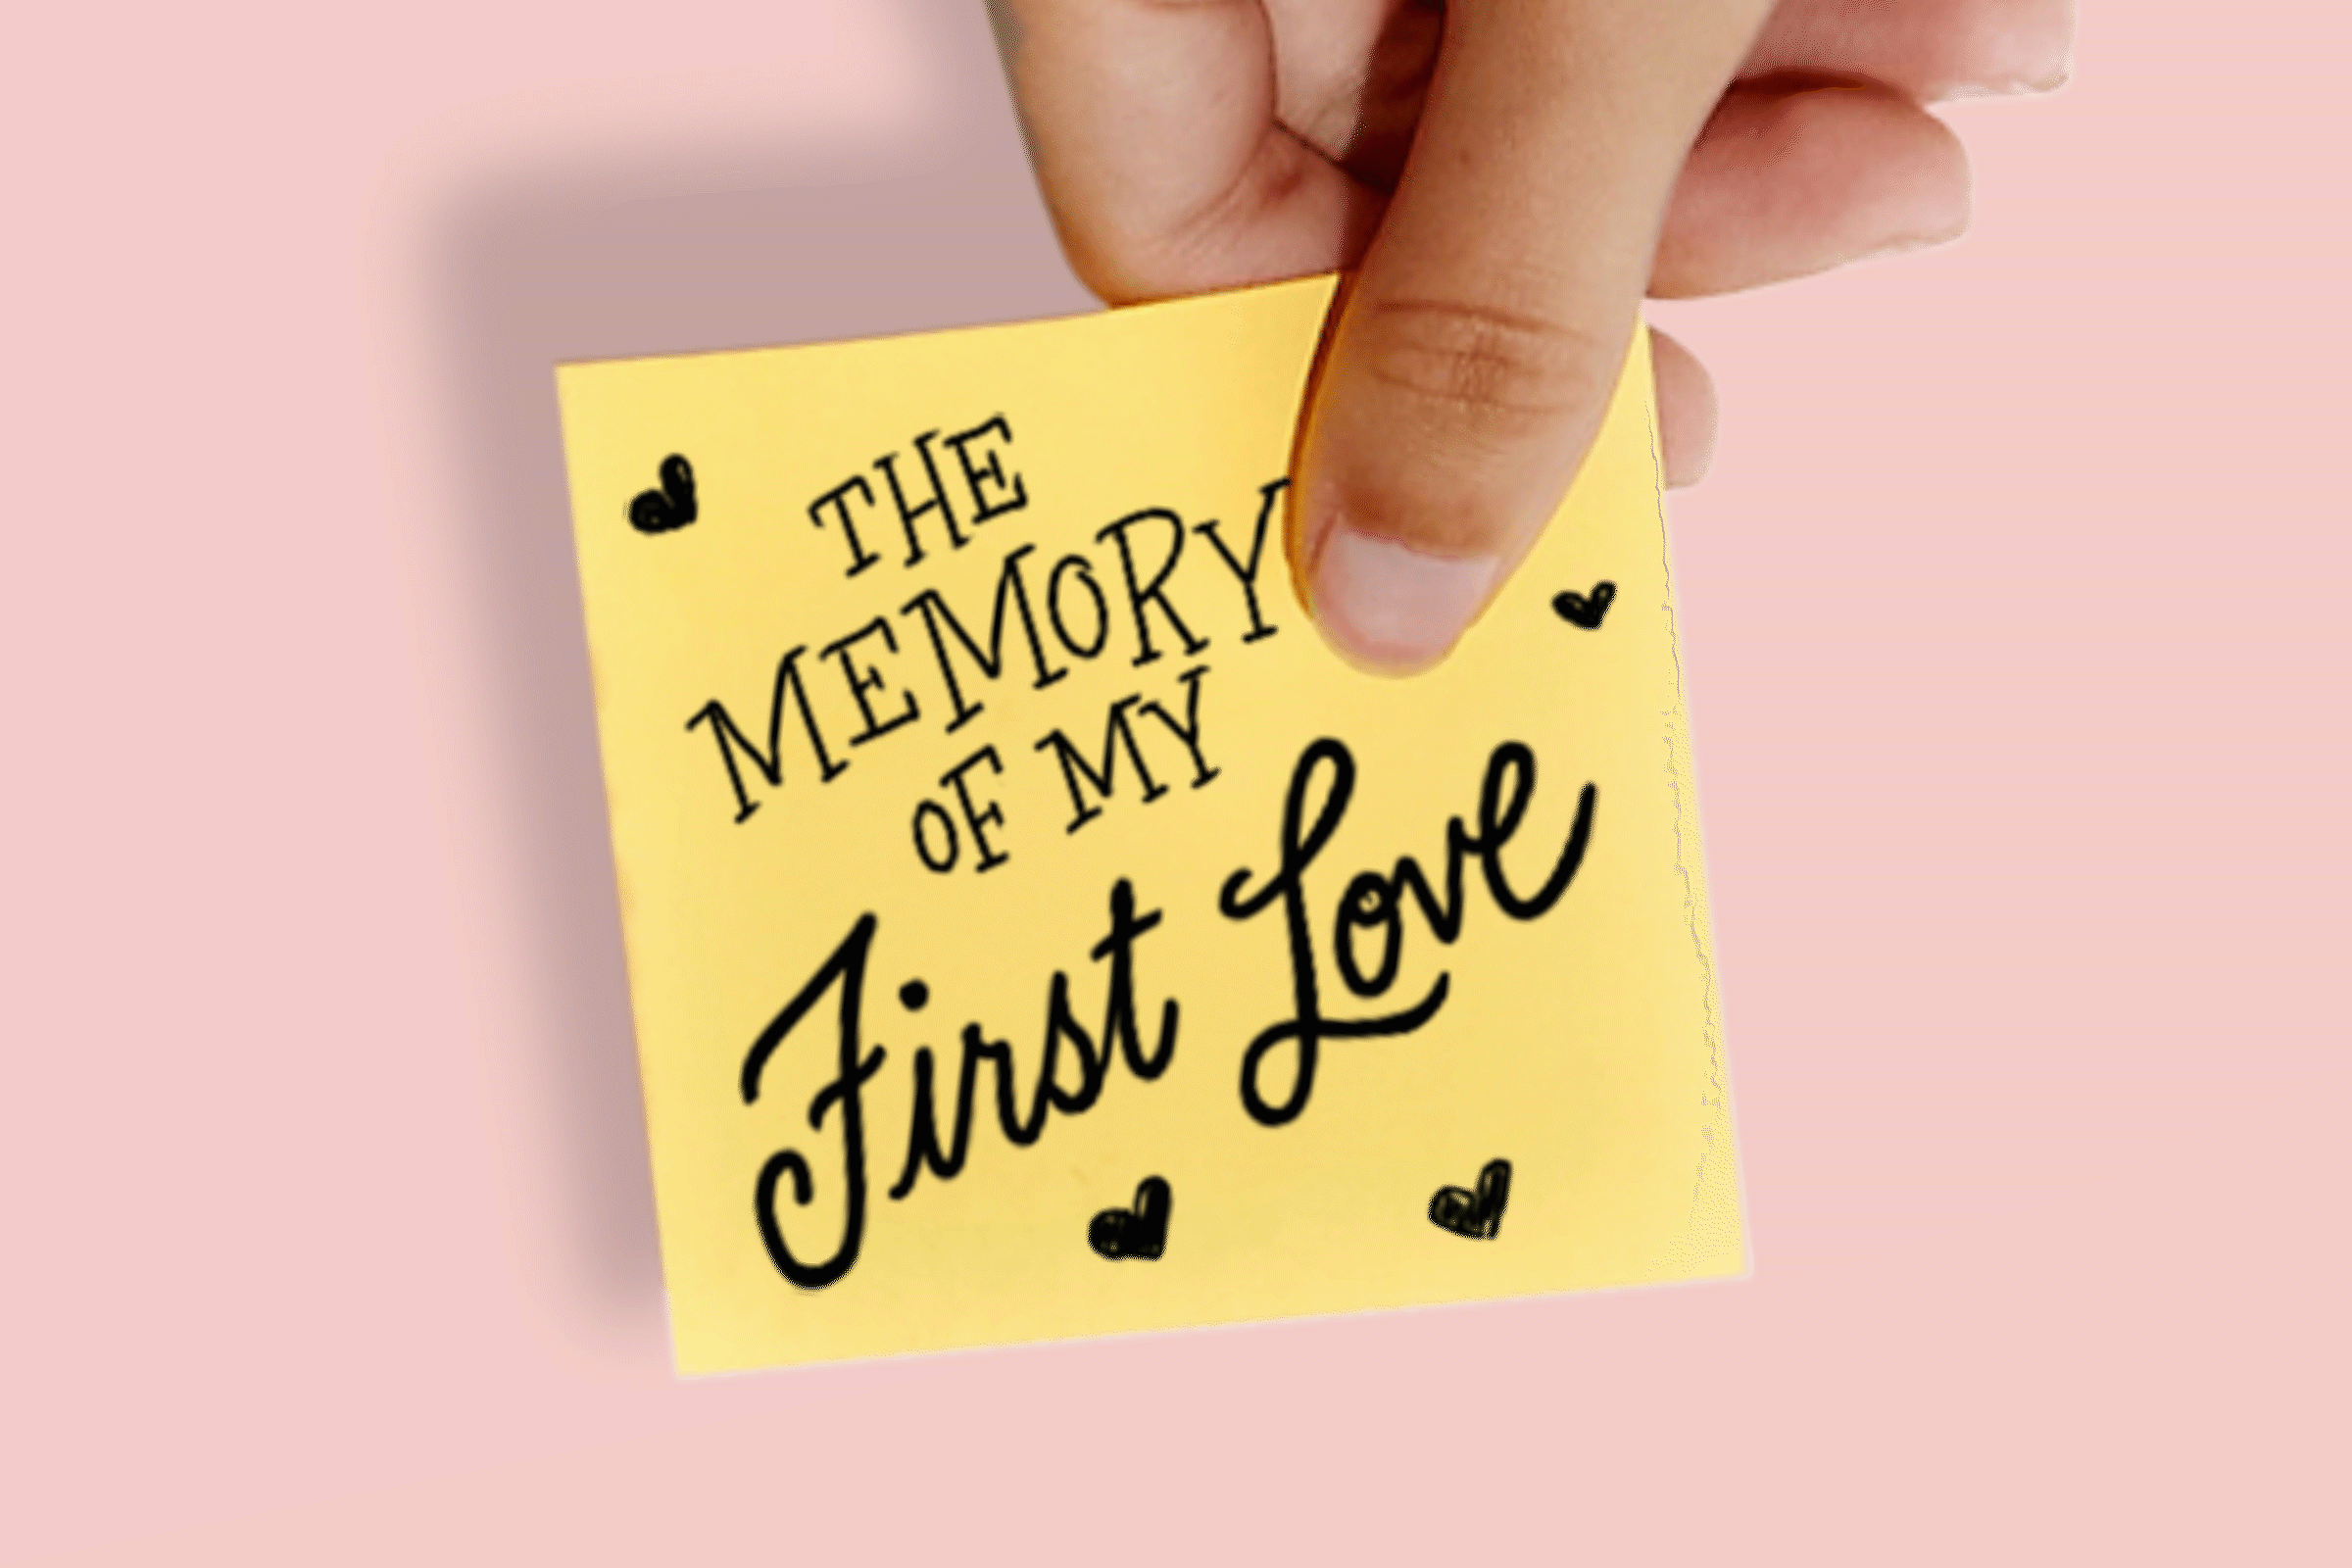 A post-it note with hand-lettering that says "the memory of my first love"